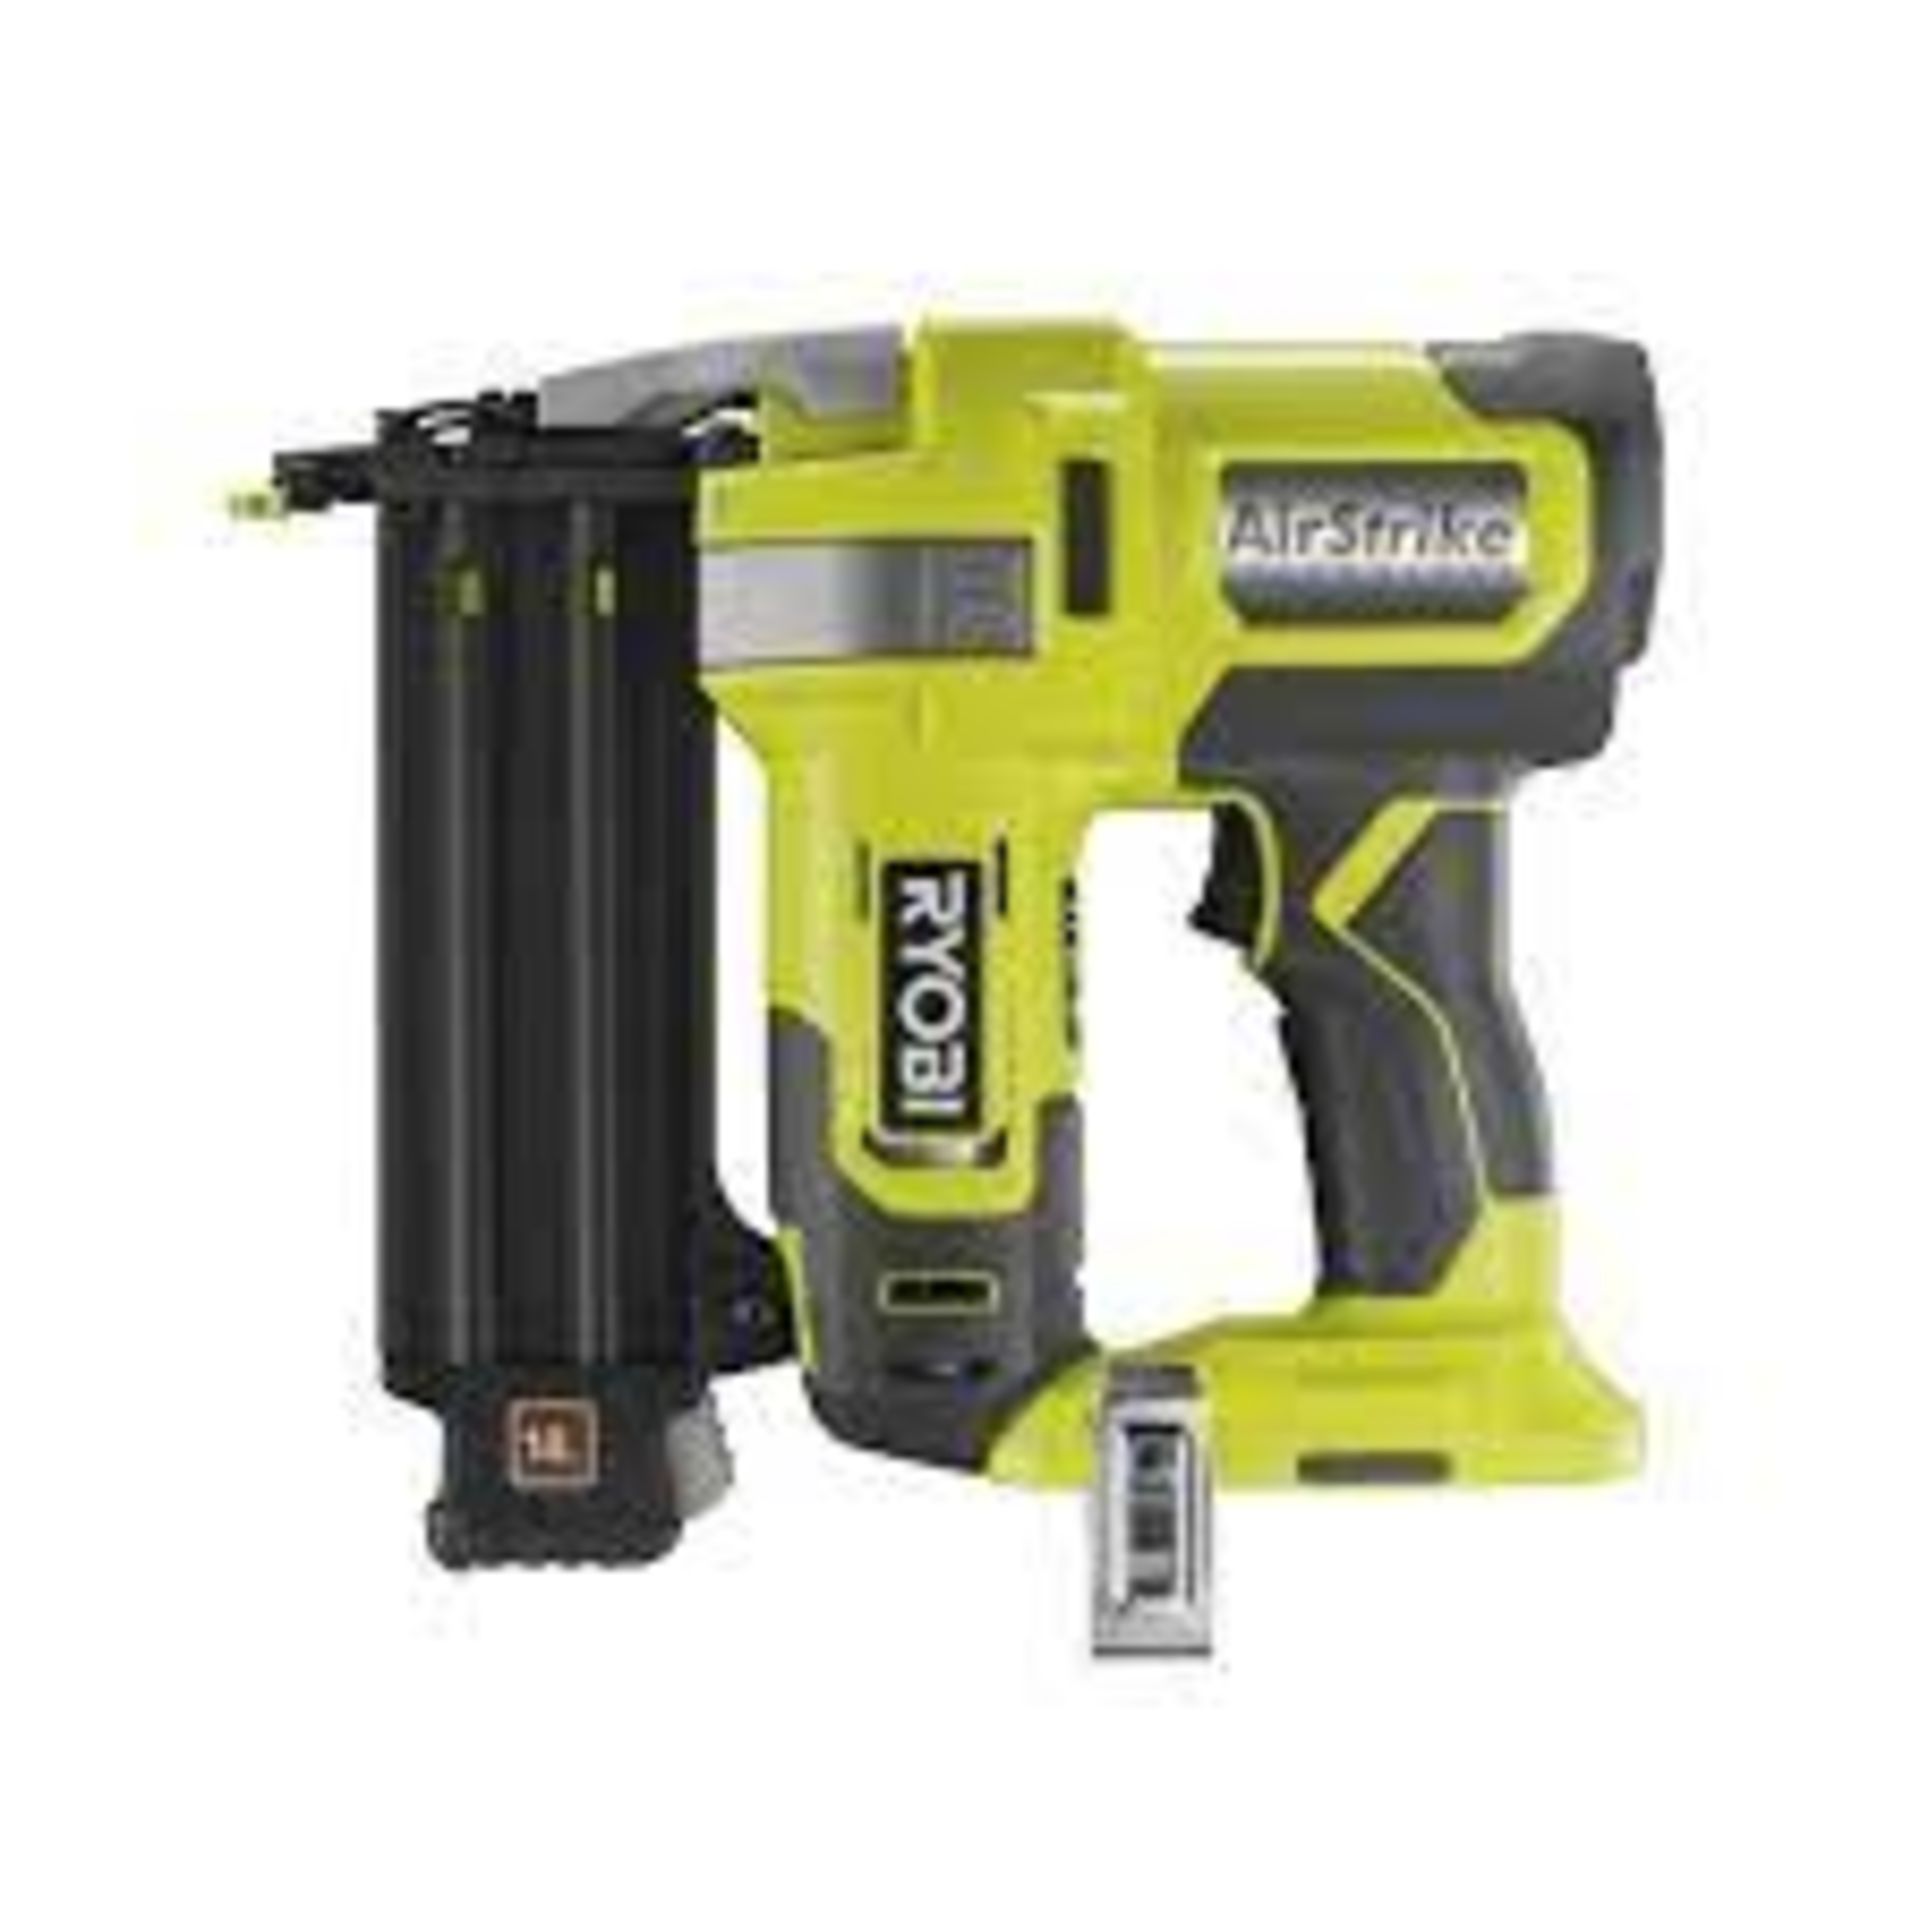 Ryobi ONE+ 18 Gauge Brad Nailer 18V R18GN18 Kit with Charger and Battery . - SR